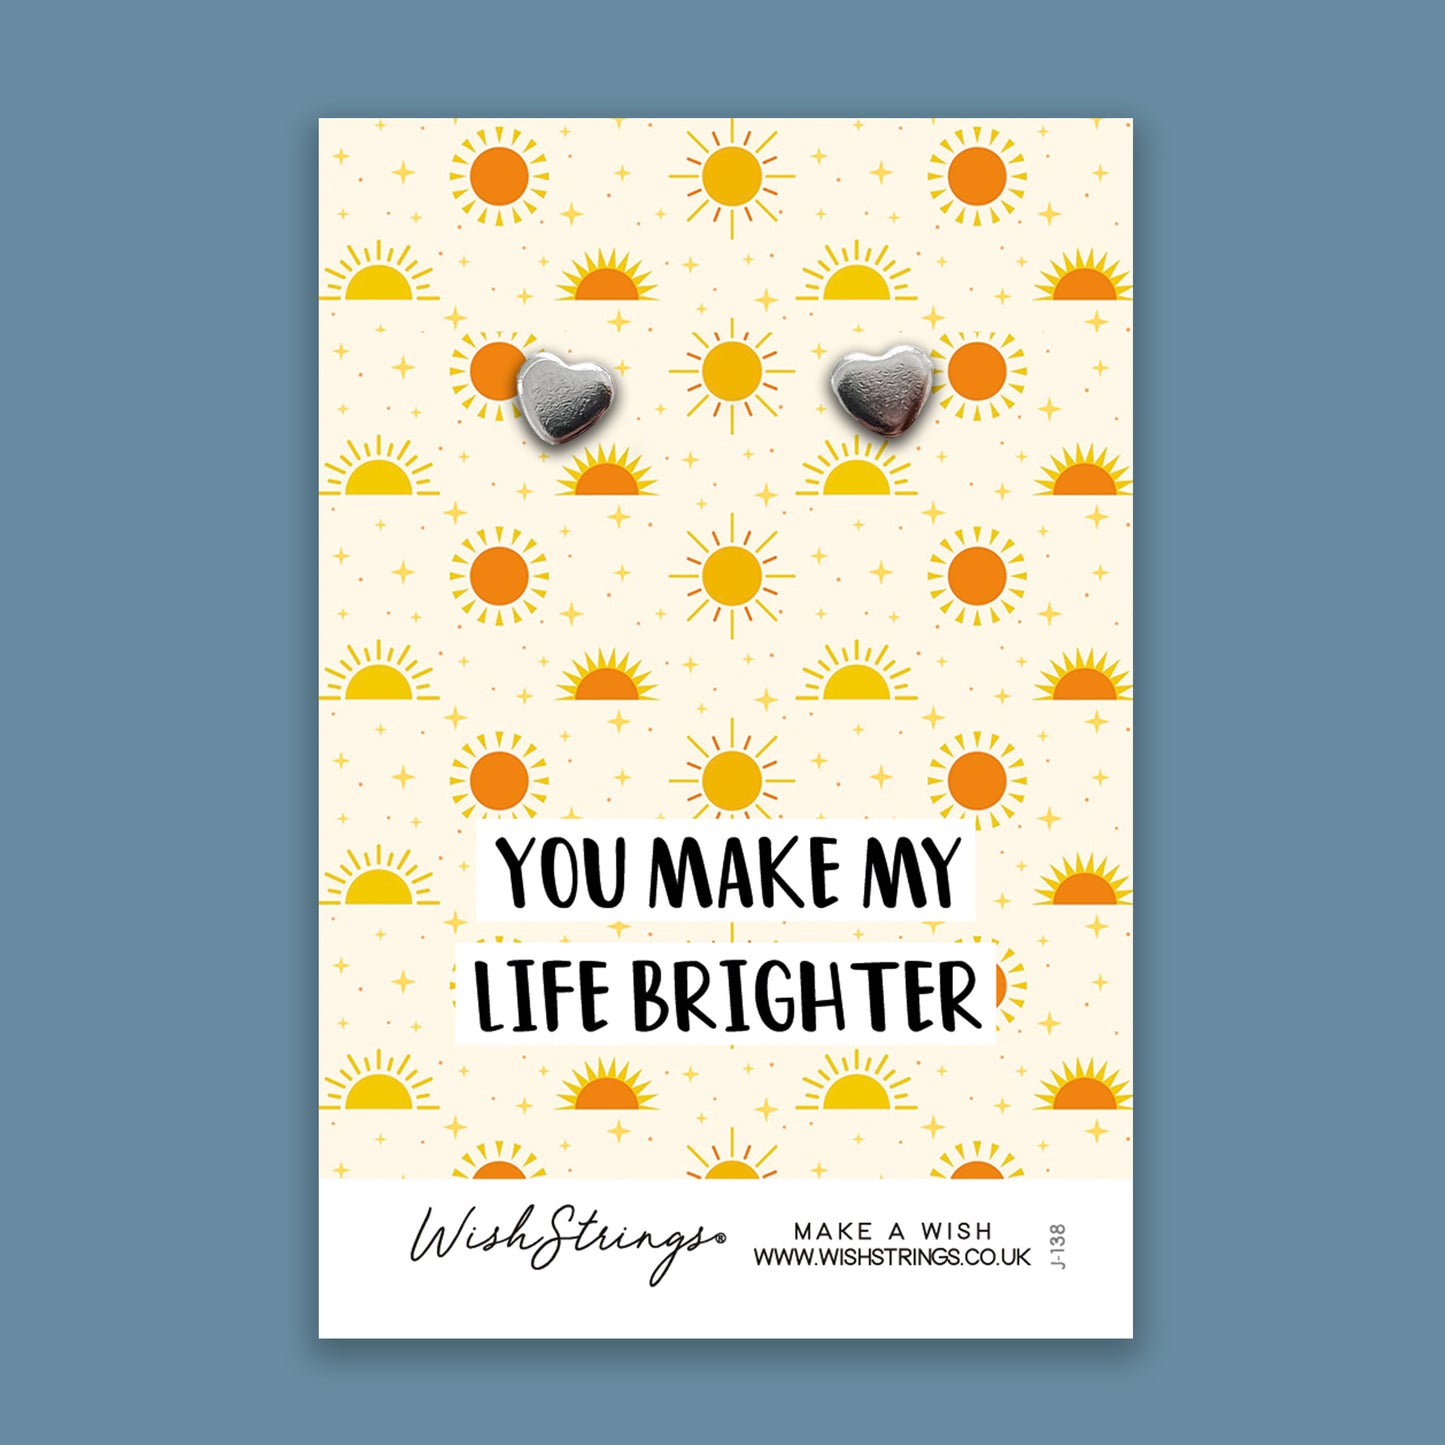 You make my life brighter - Silver Heart Stud Earrings | 304 Stainless - Hypoallergenic